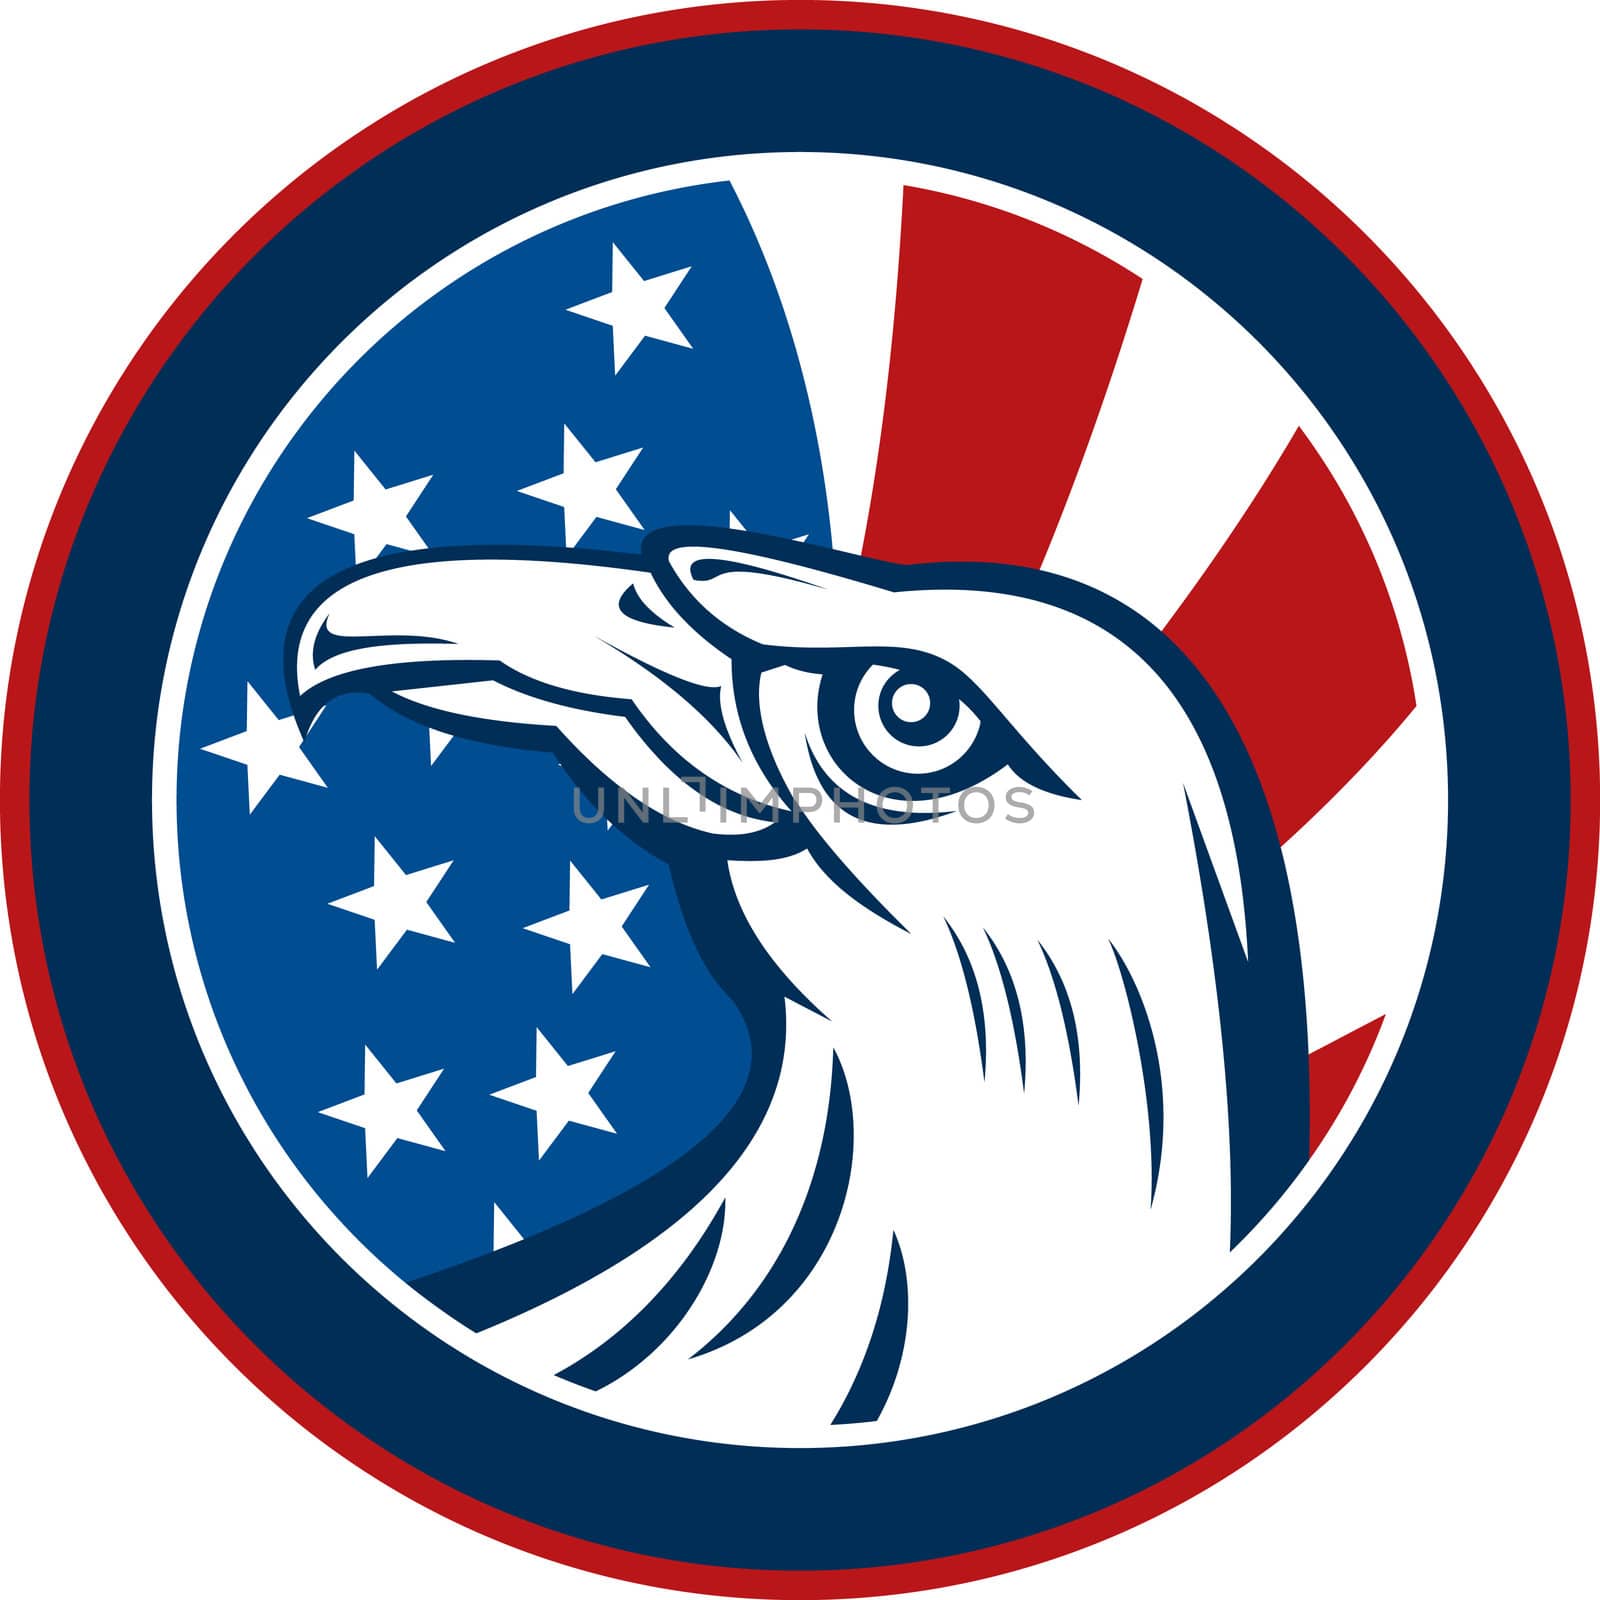 graphic illustration of an American eagle with stars and stripes flag set inside a circle on white background